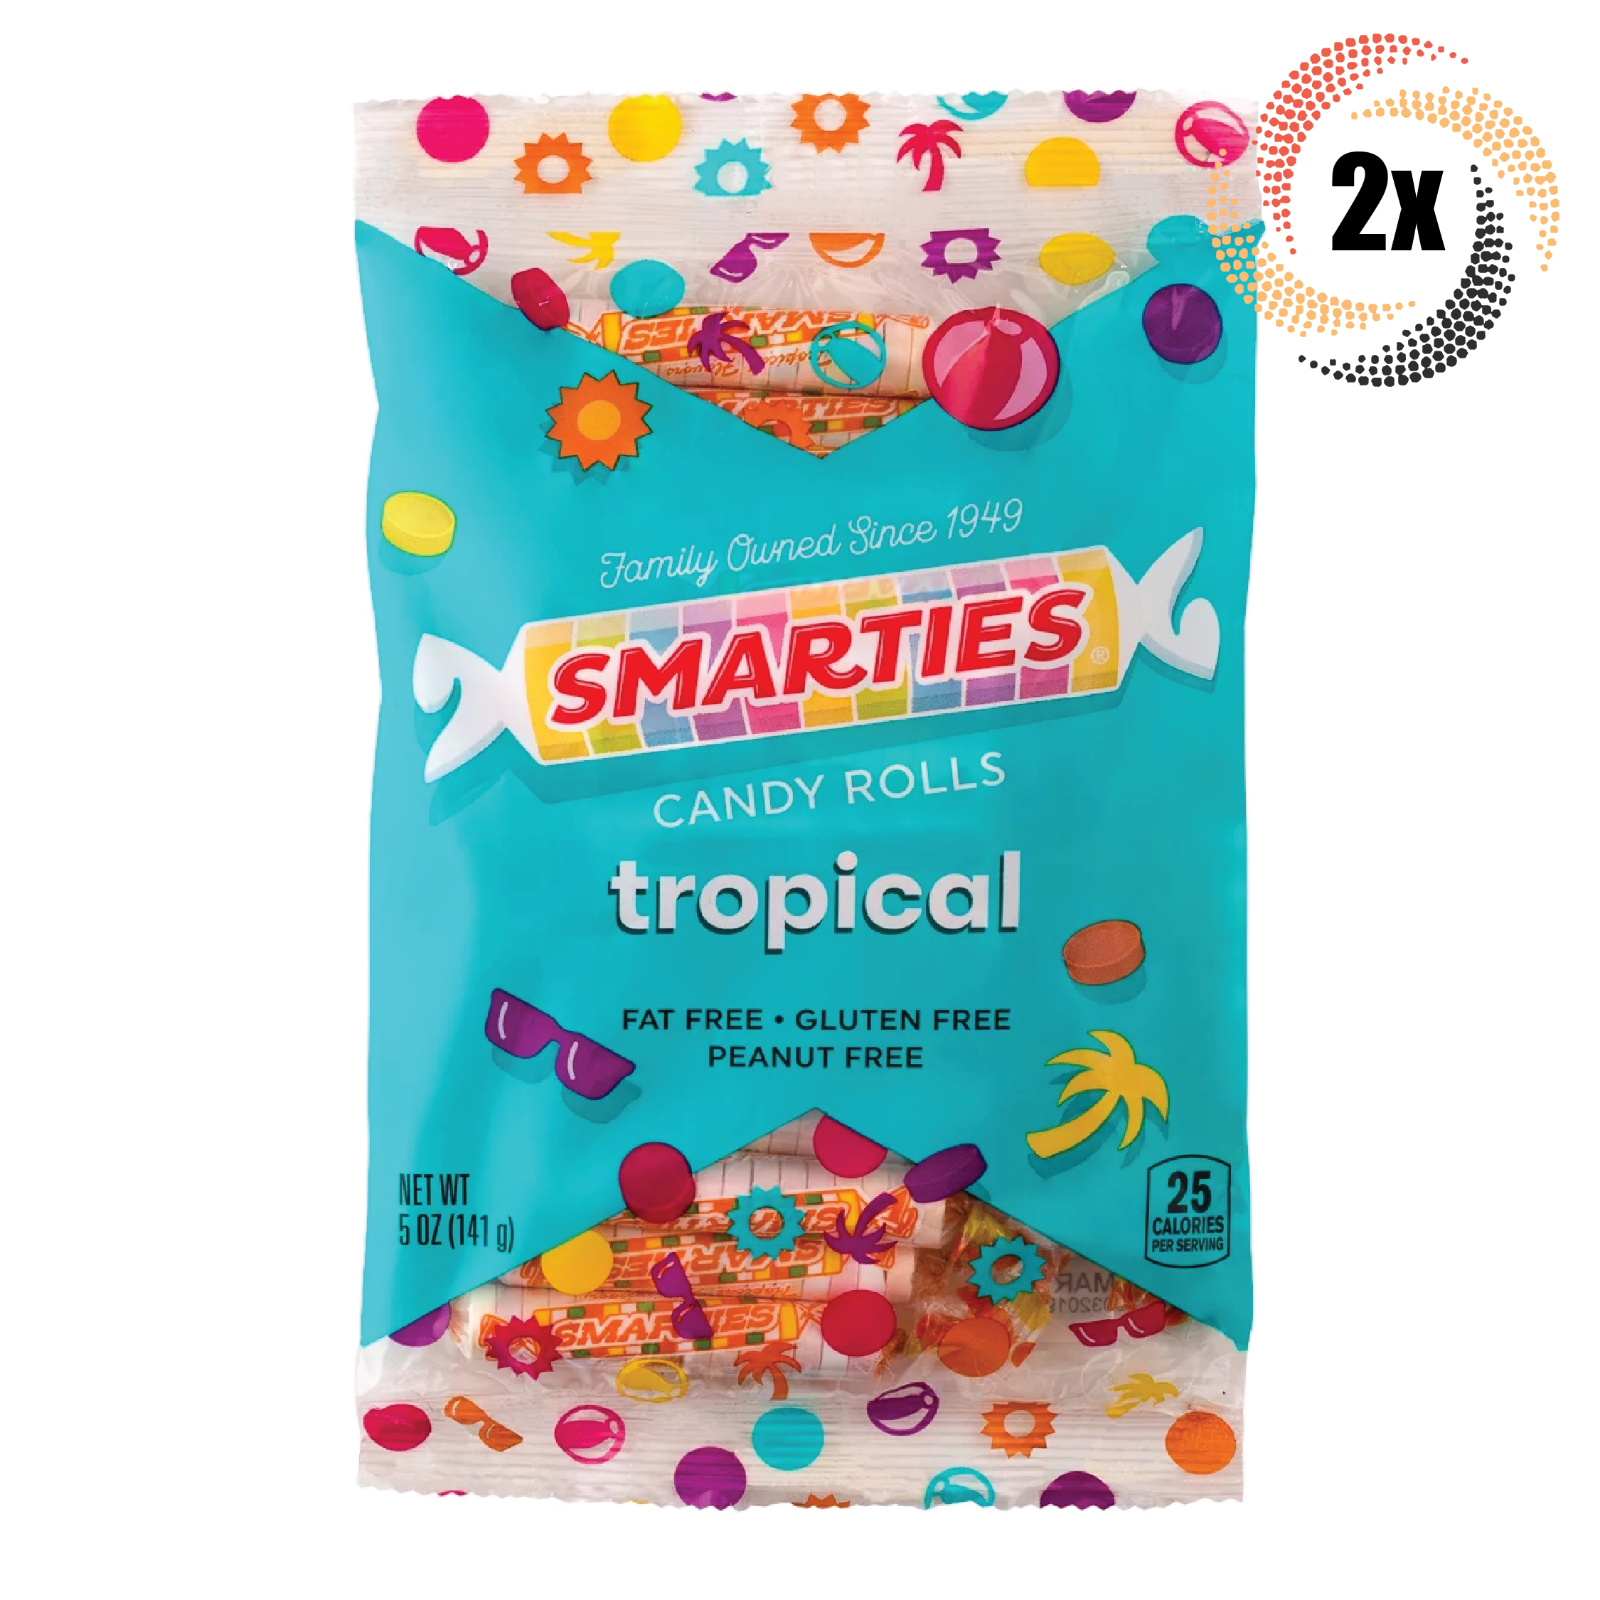 2x Bags Smarties Tropical Flavored Hard Candy Rolls | Fat & Gluten Free | 5oz - $12.01